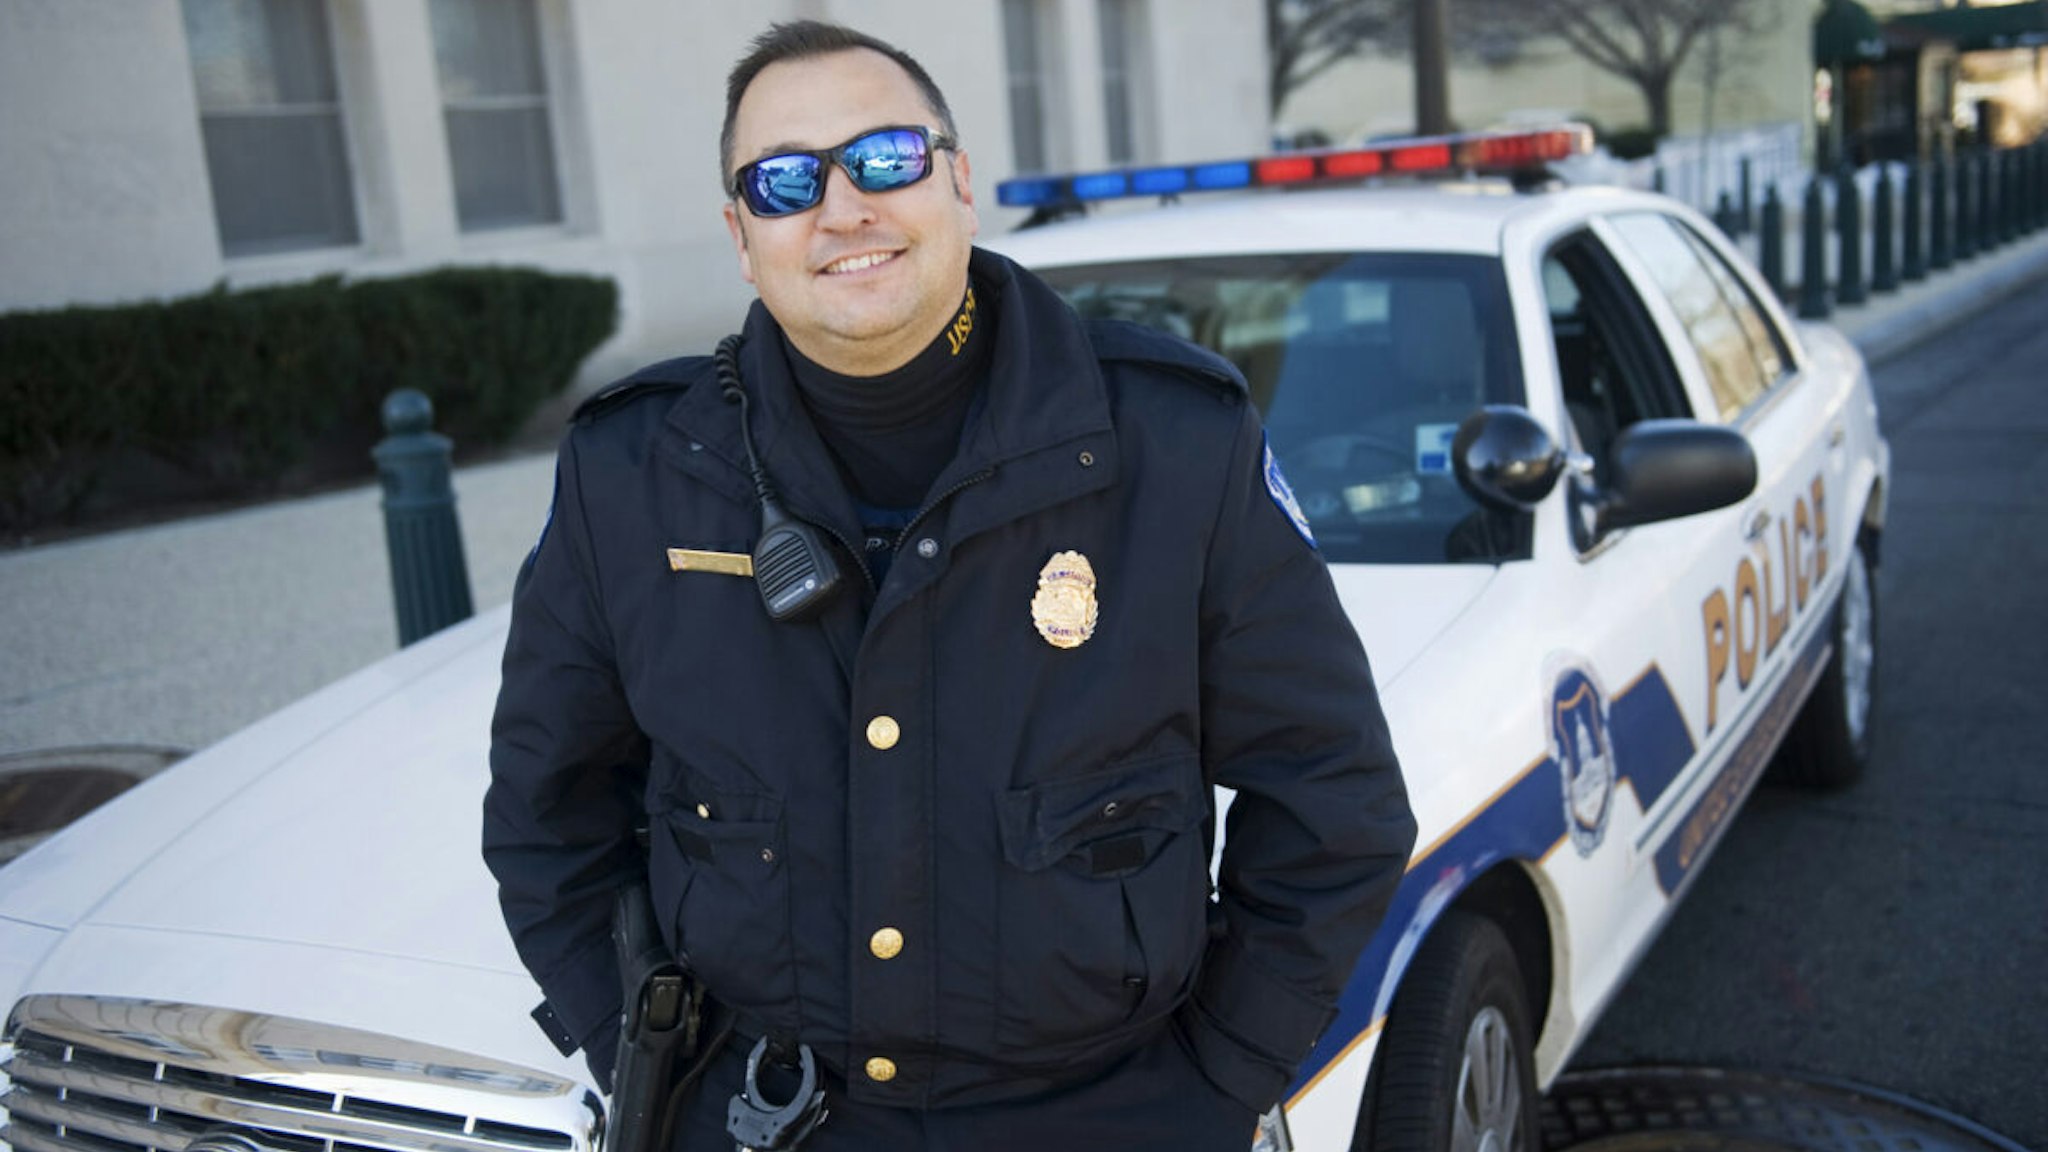 U.S. Capitol Police Officer Michael Riley poses for a picture outside of headquarters on D St., NE. Riley was selected Officer of the Month for February 2011 by the National Law Enforcement Officers Memorial Fund.